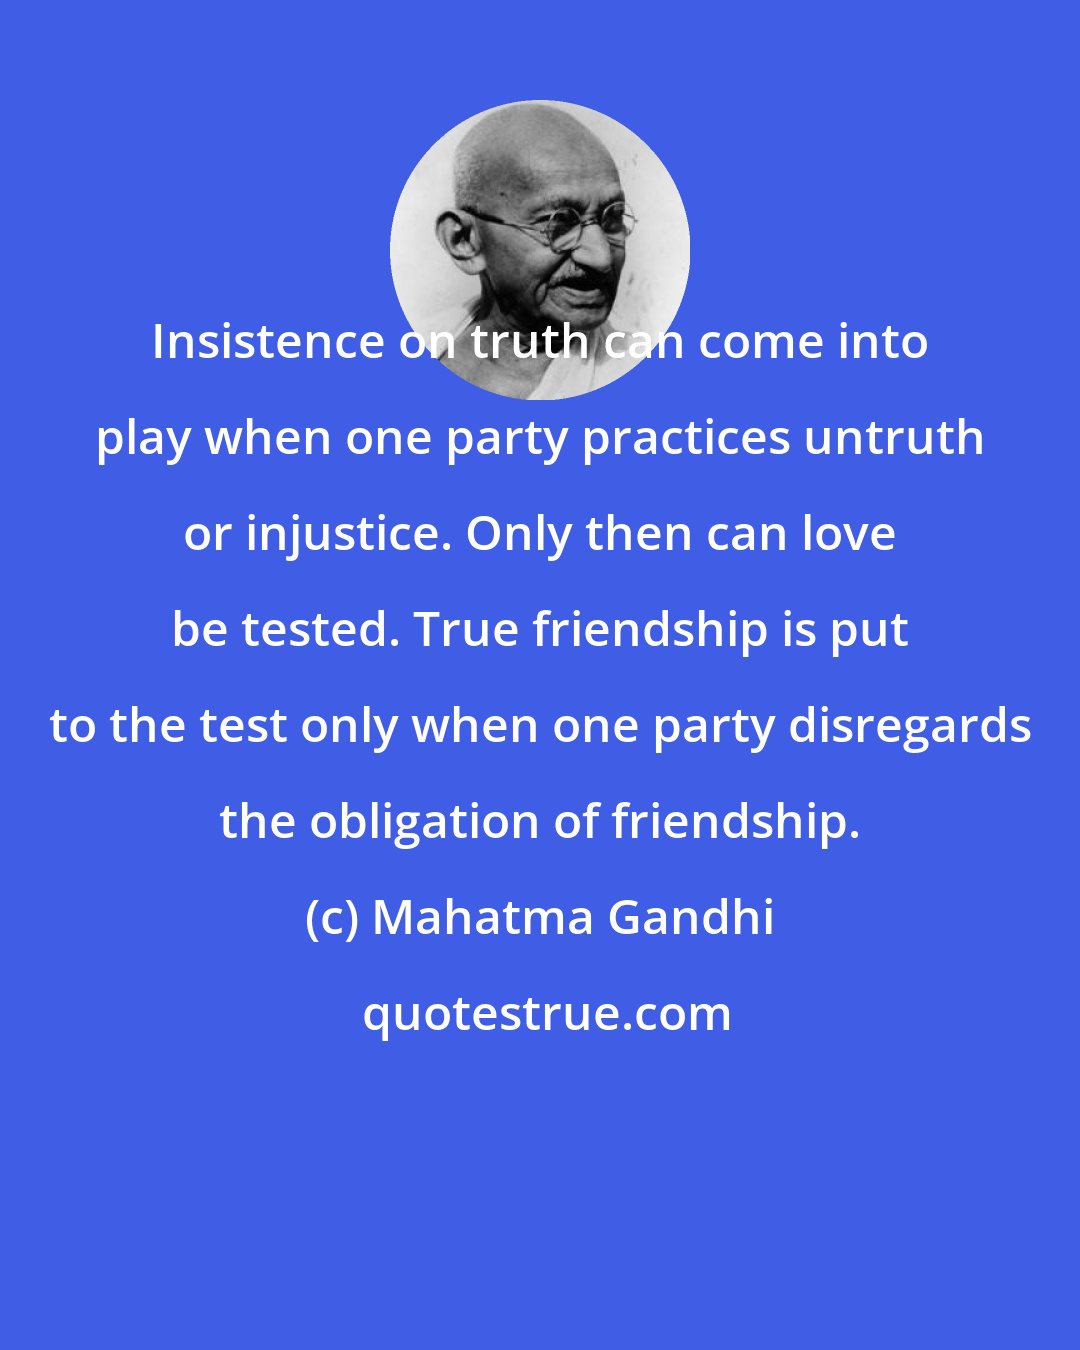 Mahatma Gandhi: Insistence on truth can come into play when one party practices untruth or injustice. Only then can love be tested. True friendship is put to the test only when one party disregards the obligation of friendship.